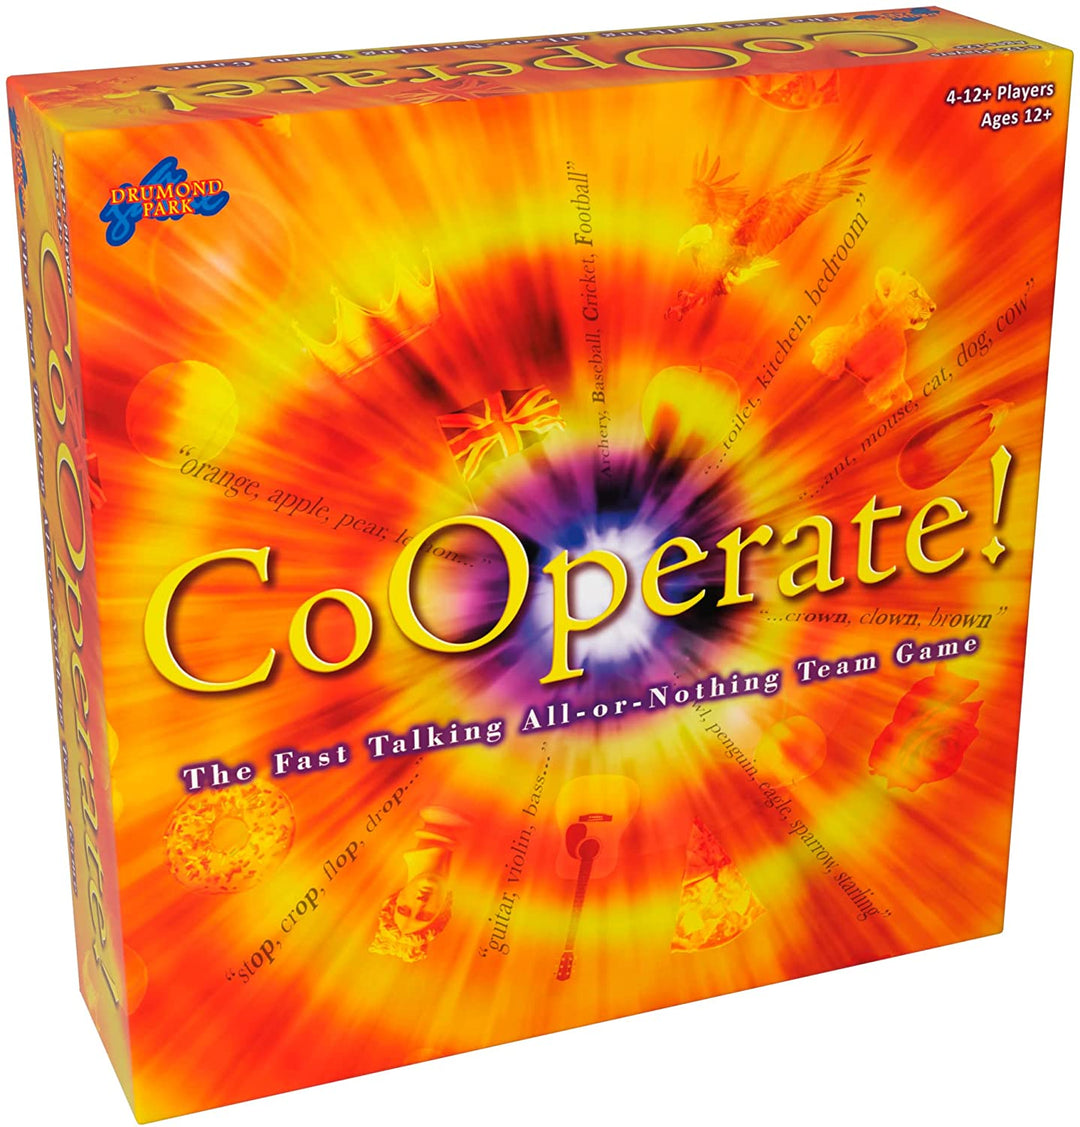 Drumond Park CoOperate! Board Game, Board Games for Families and Teenagers, Fast Talking Board Game, Family Board Games for Adults suitable From 12+ Years